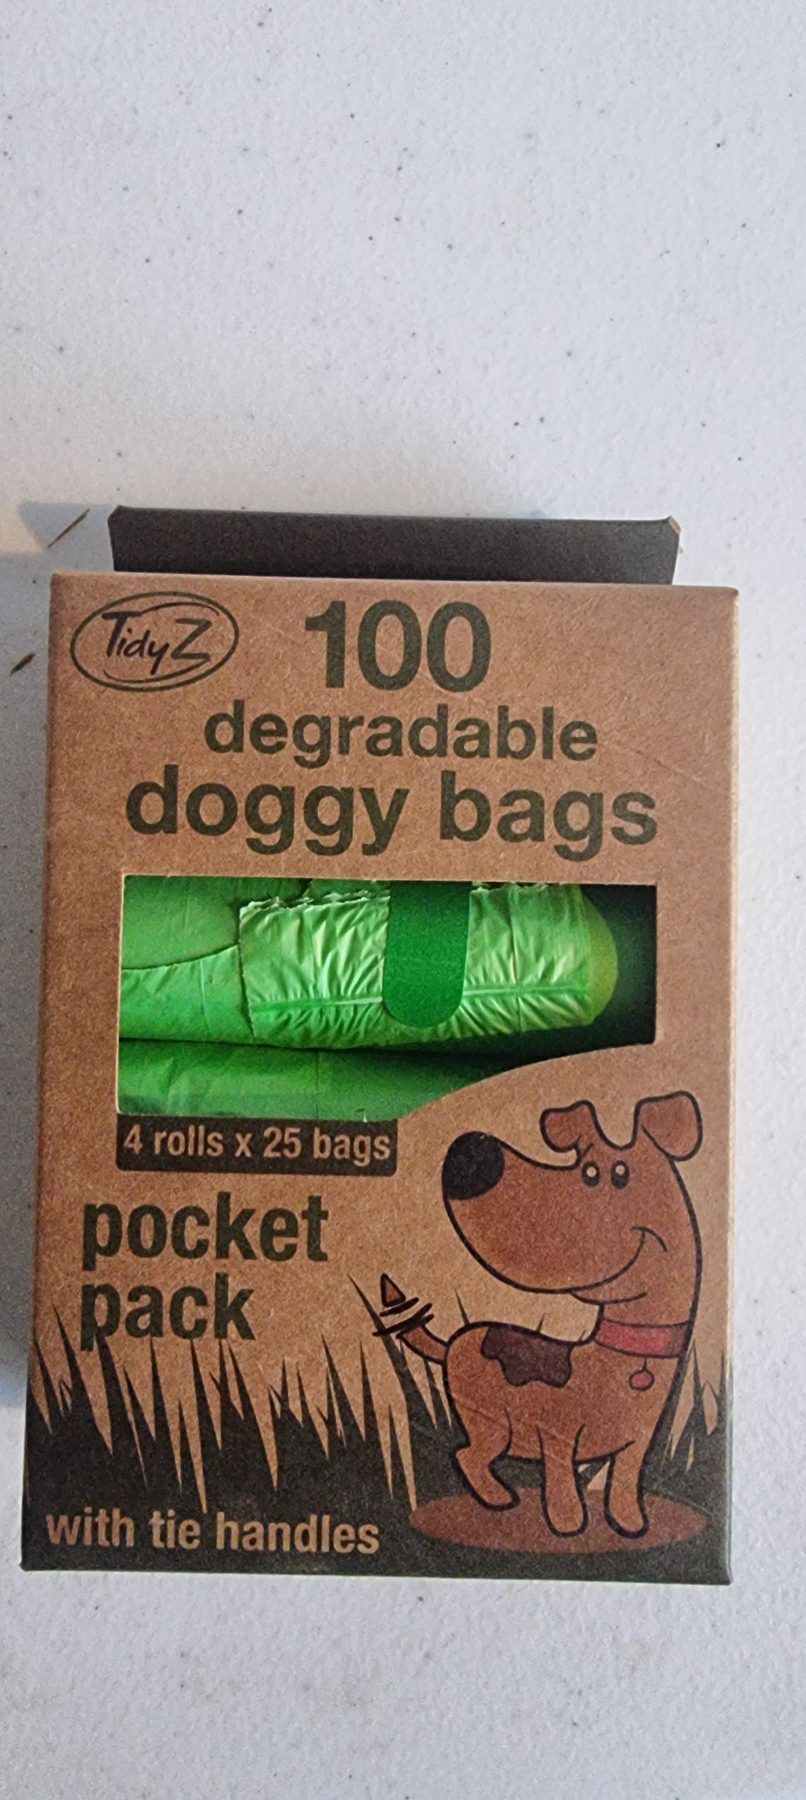 100 degradable doggy poo bags